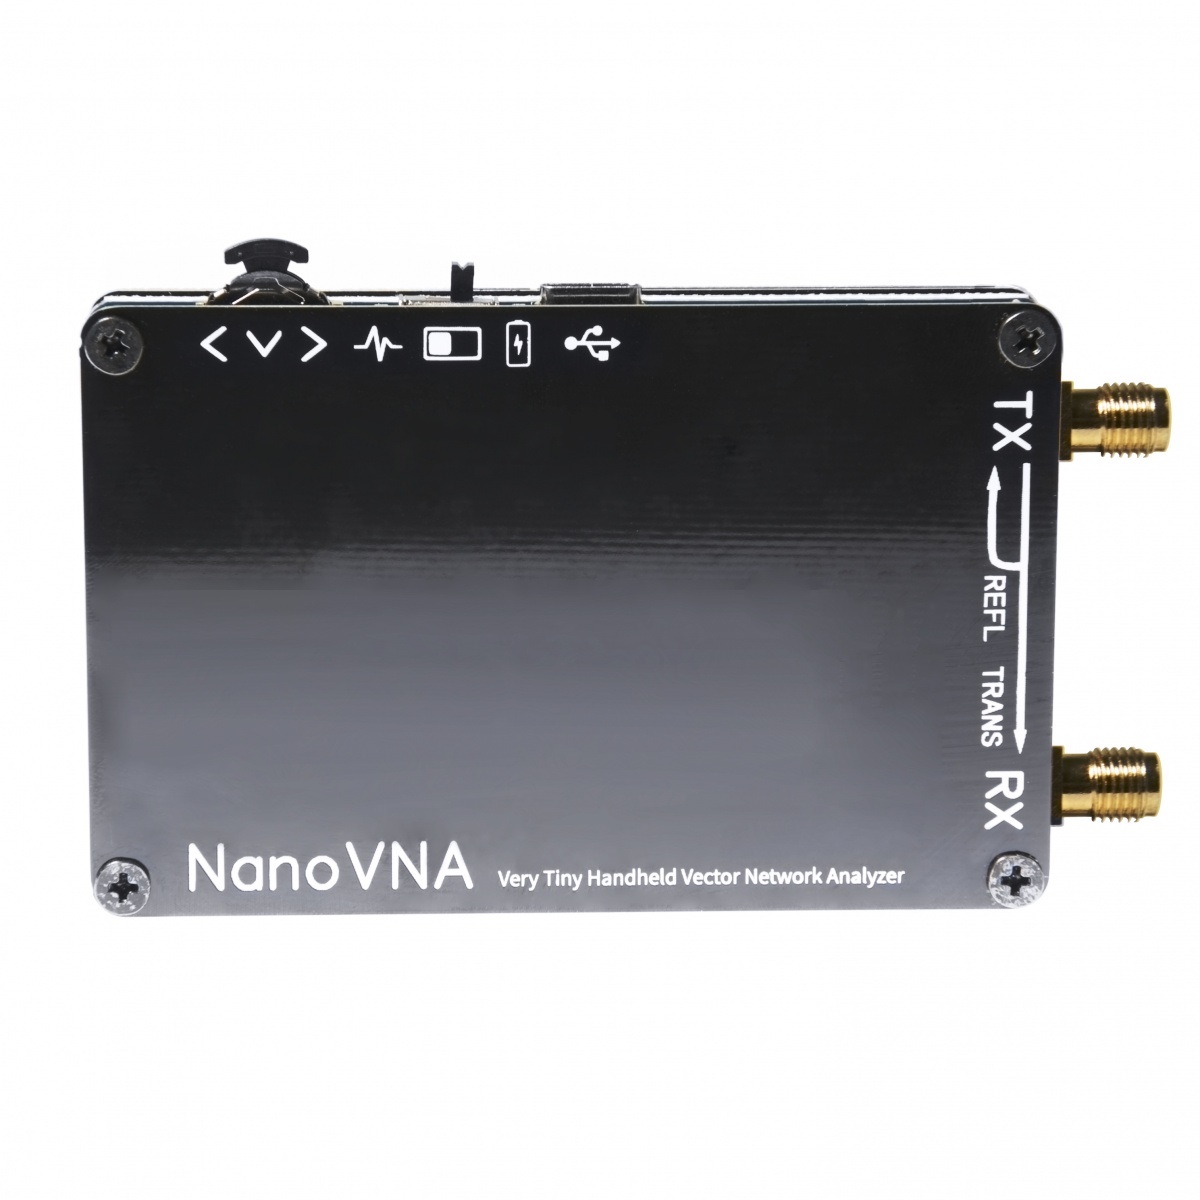 Open Hardware Vector Network Analyzer Kit from Authorized Distributor Support Innovation! Includes 50kHz-900MHz+ Portable VNA with EMI Shielding & SOLT Calibration Kit Nooelec NanoVNA 